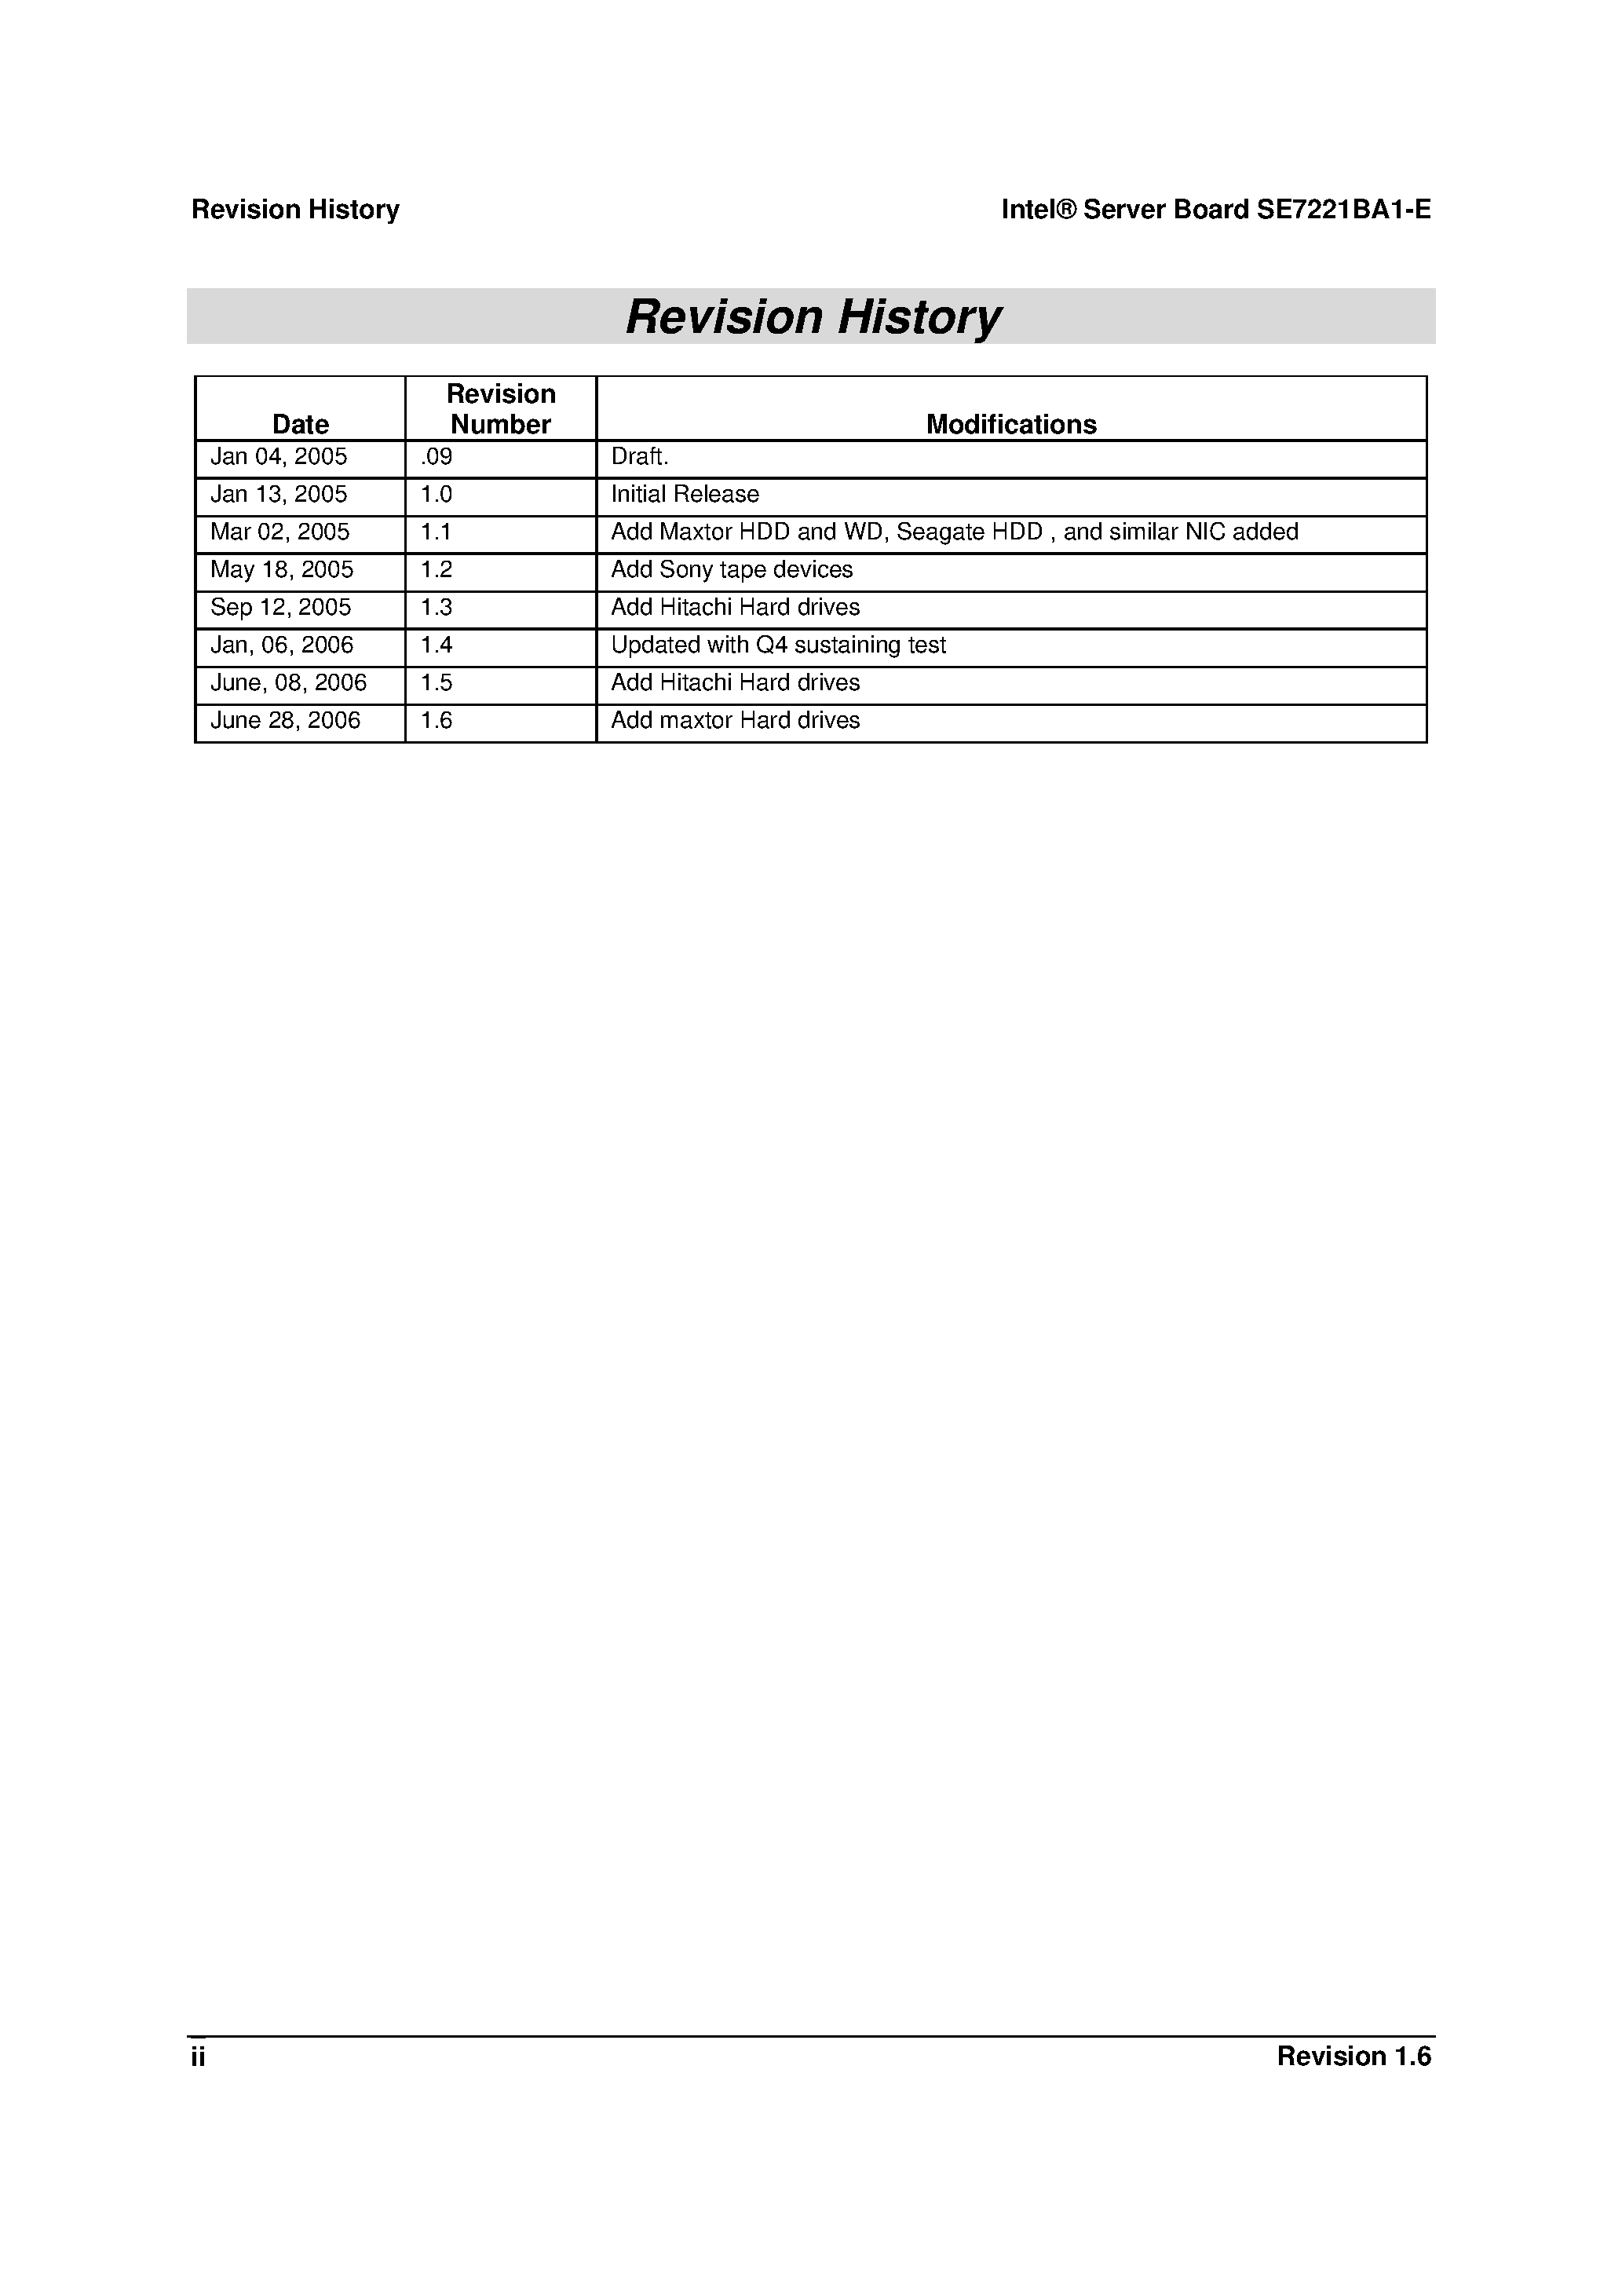 Datasheet SE7221BA1-E - Tested Hardware and Operating System List page 2